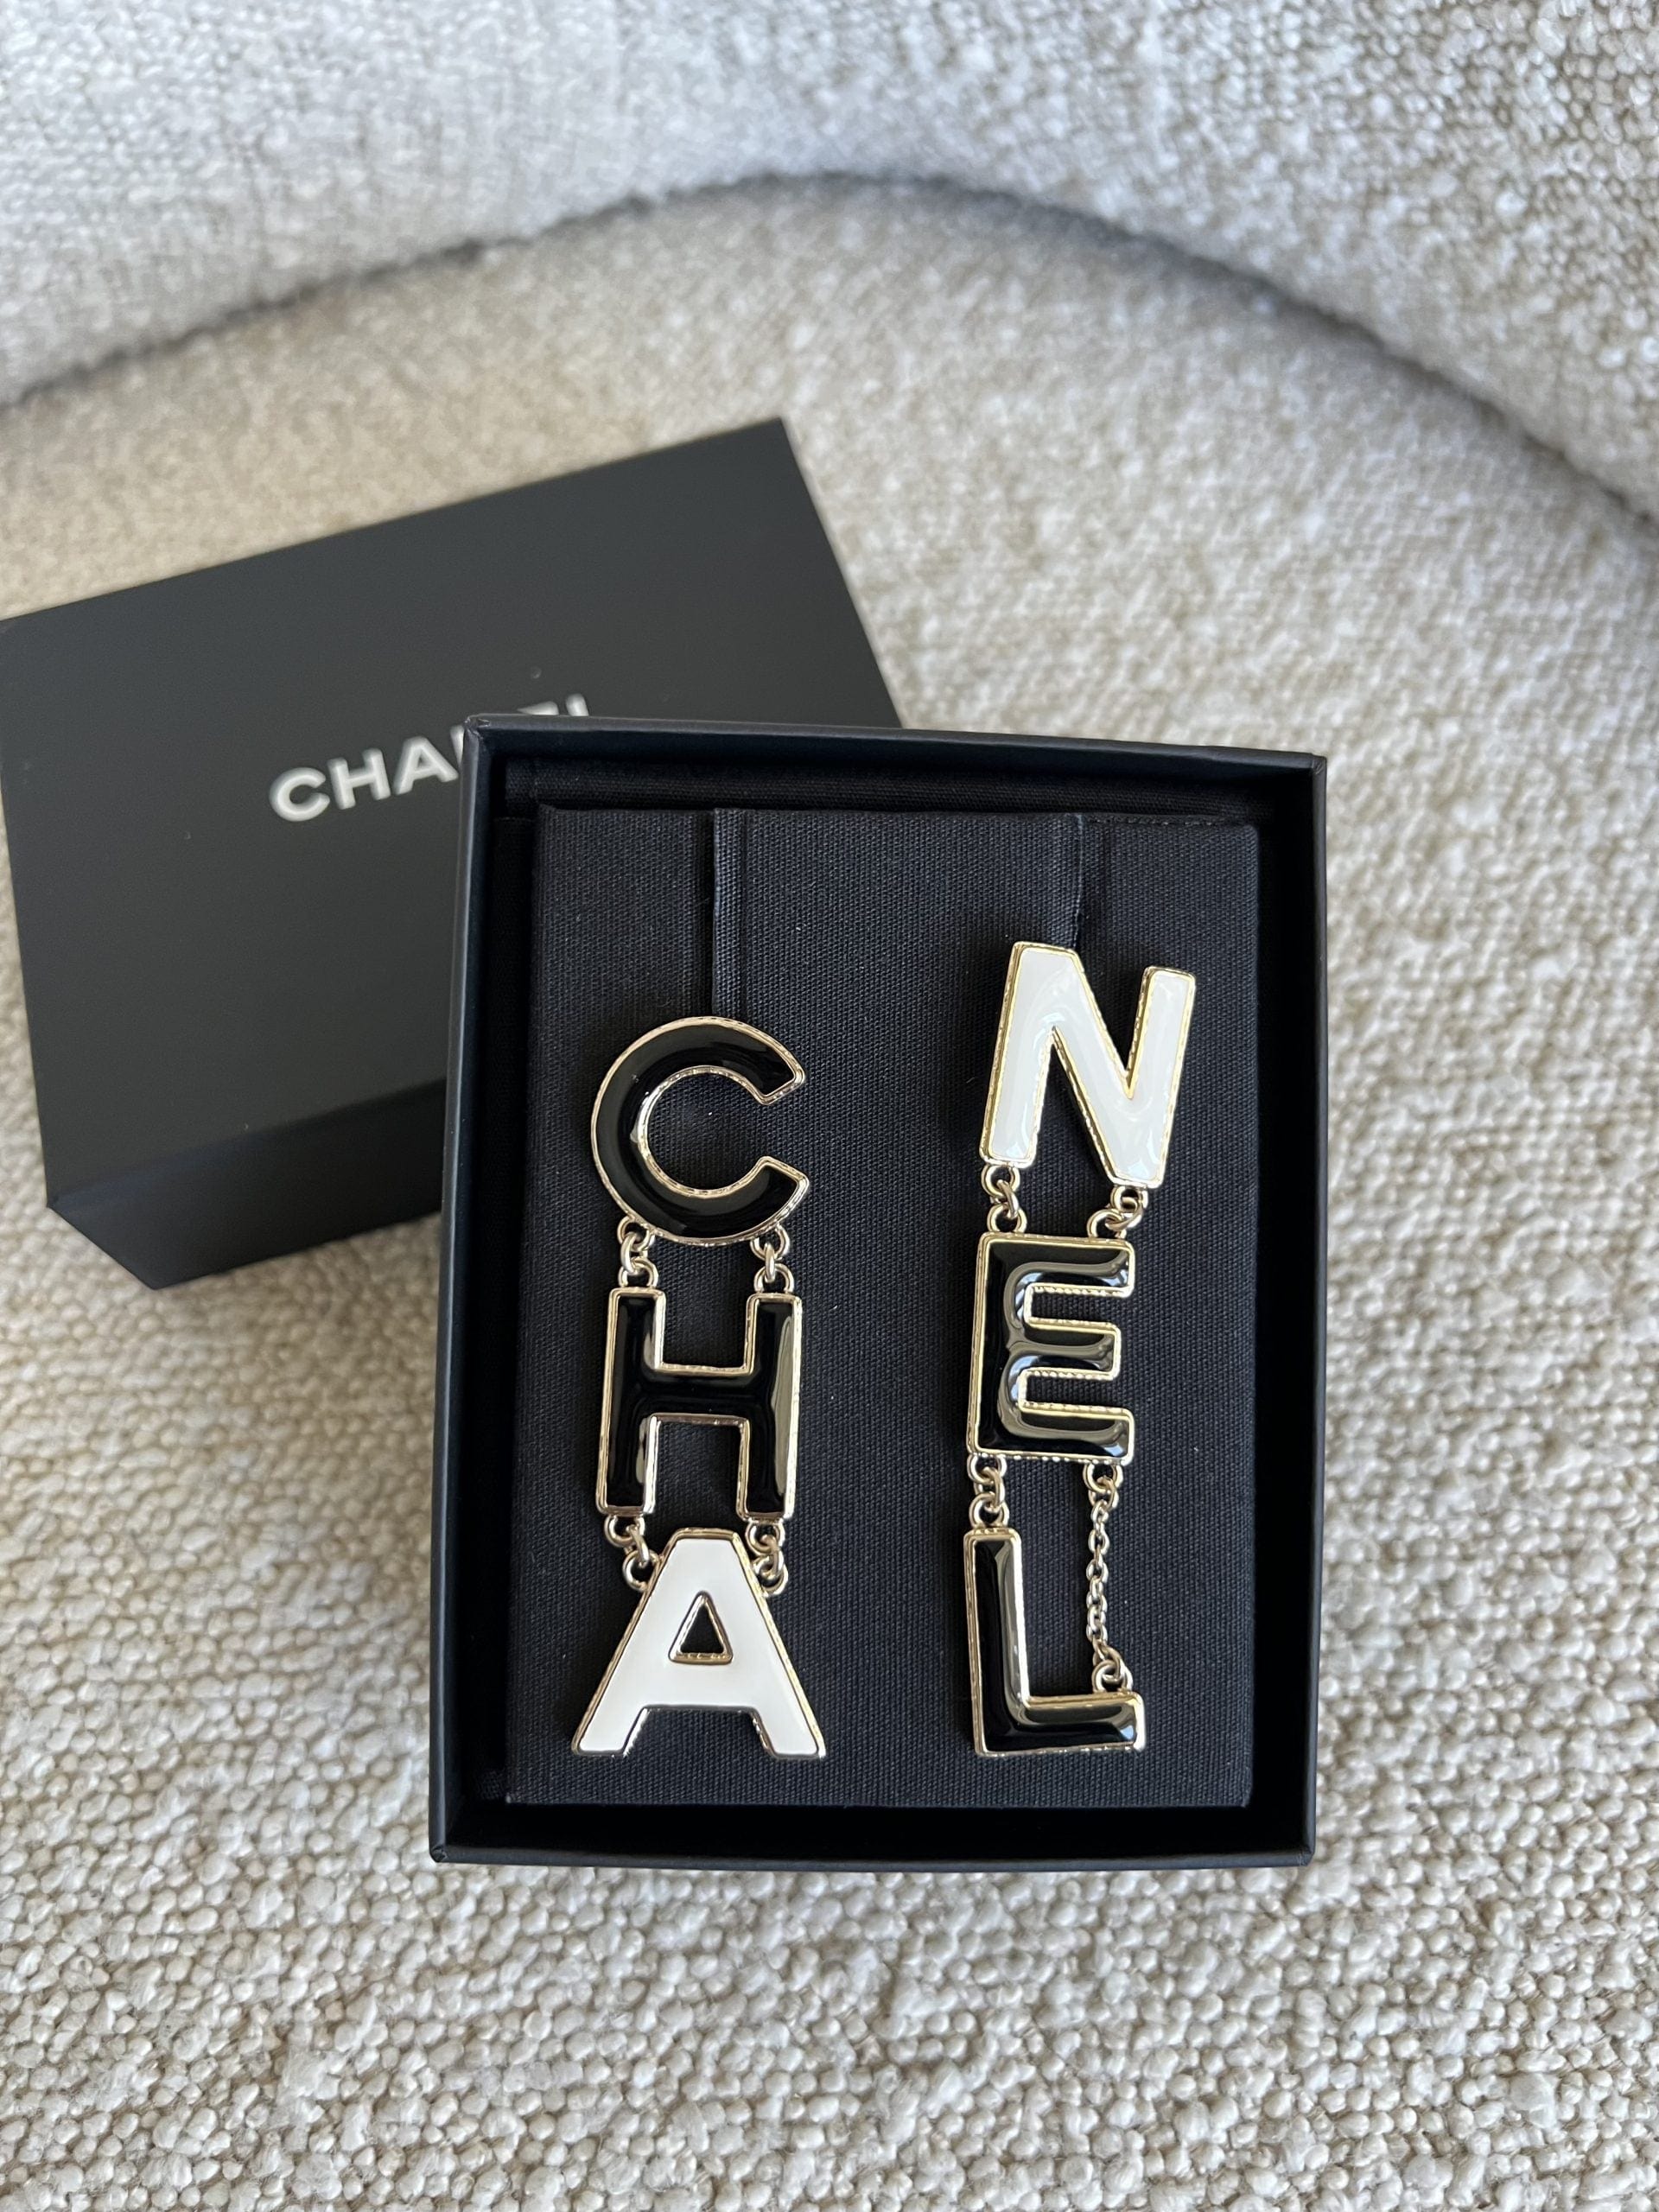 chanel earrings gold cha nel earrings black white and gold redeluxe 39788566184246